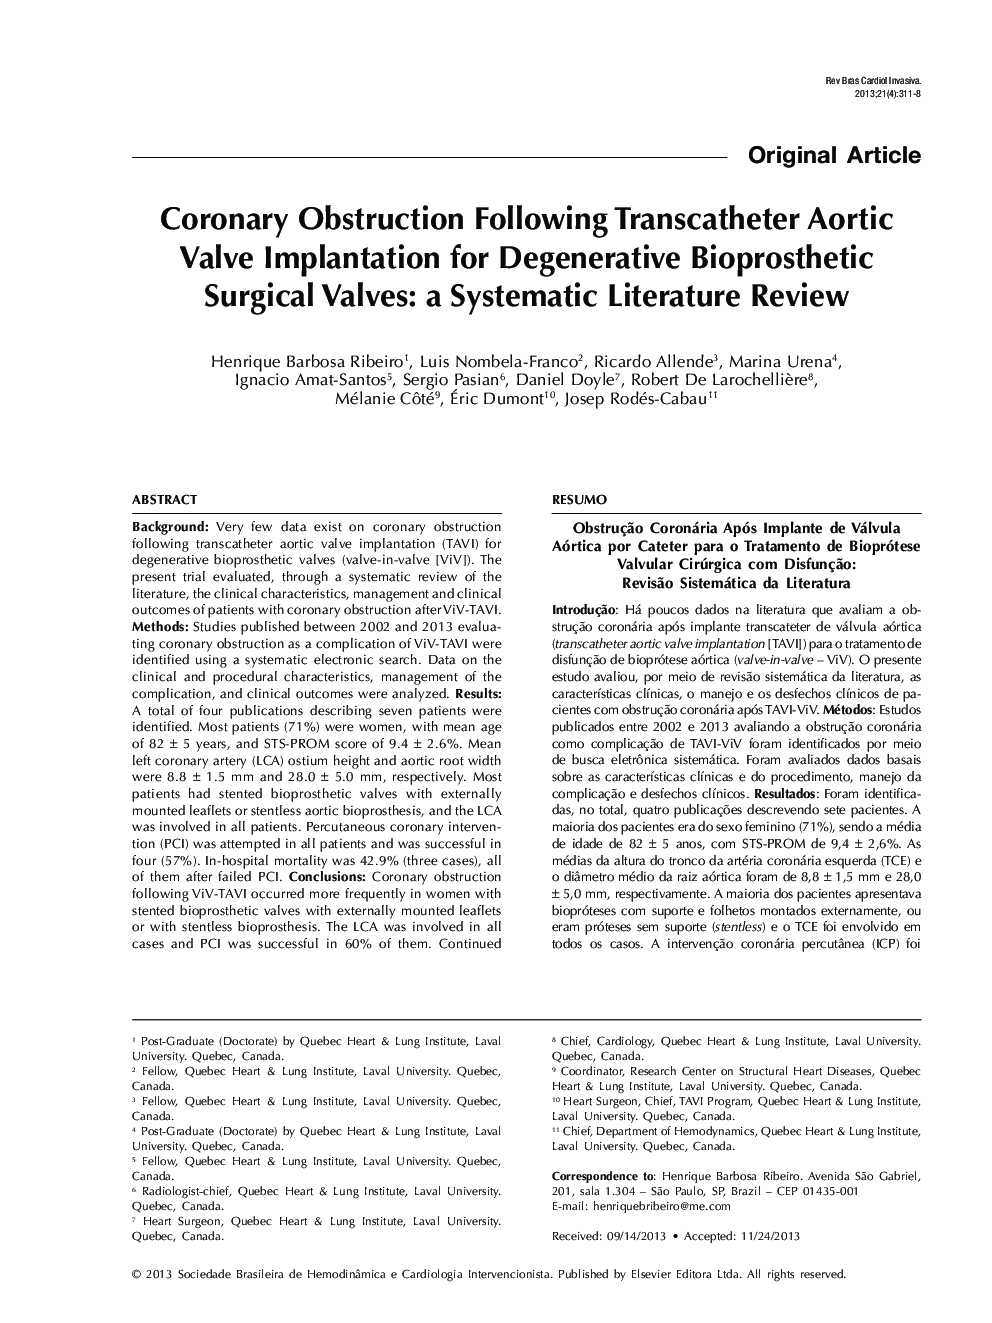 Coronary Obstruction Following Transcatheter Aortic Valve Implantation for Degenerative Bioprosthetic Surgical Valves: a Systematic Literature Review